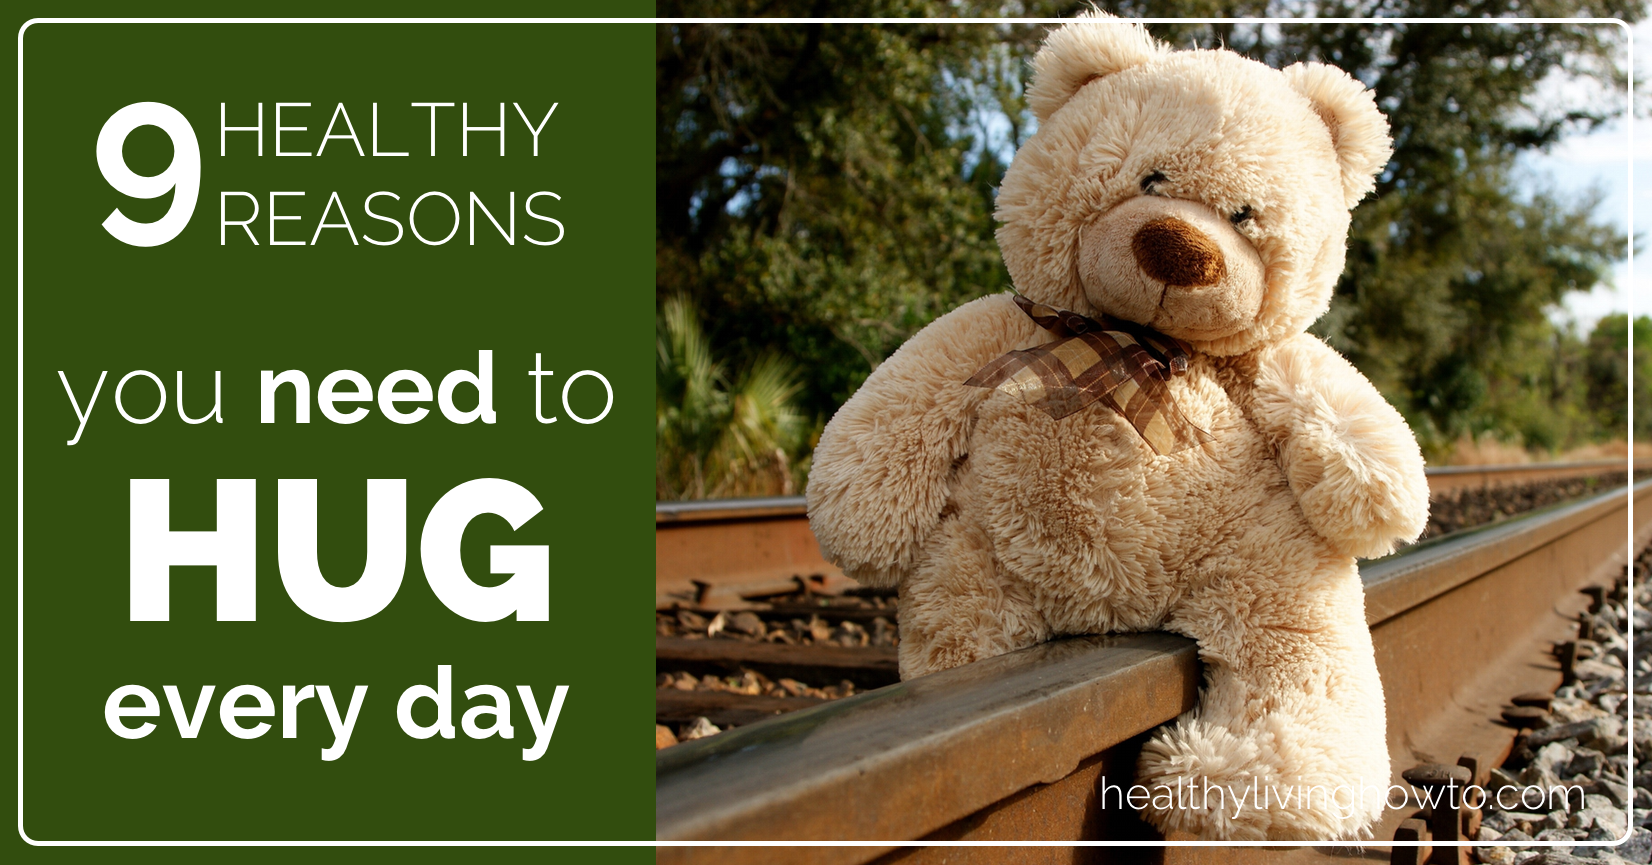 9 Healthy Reasons You Need To Hug Every Day! | healthylivinghowto.com